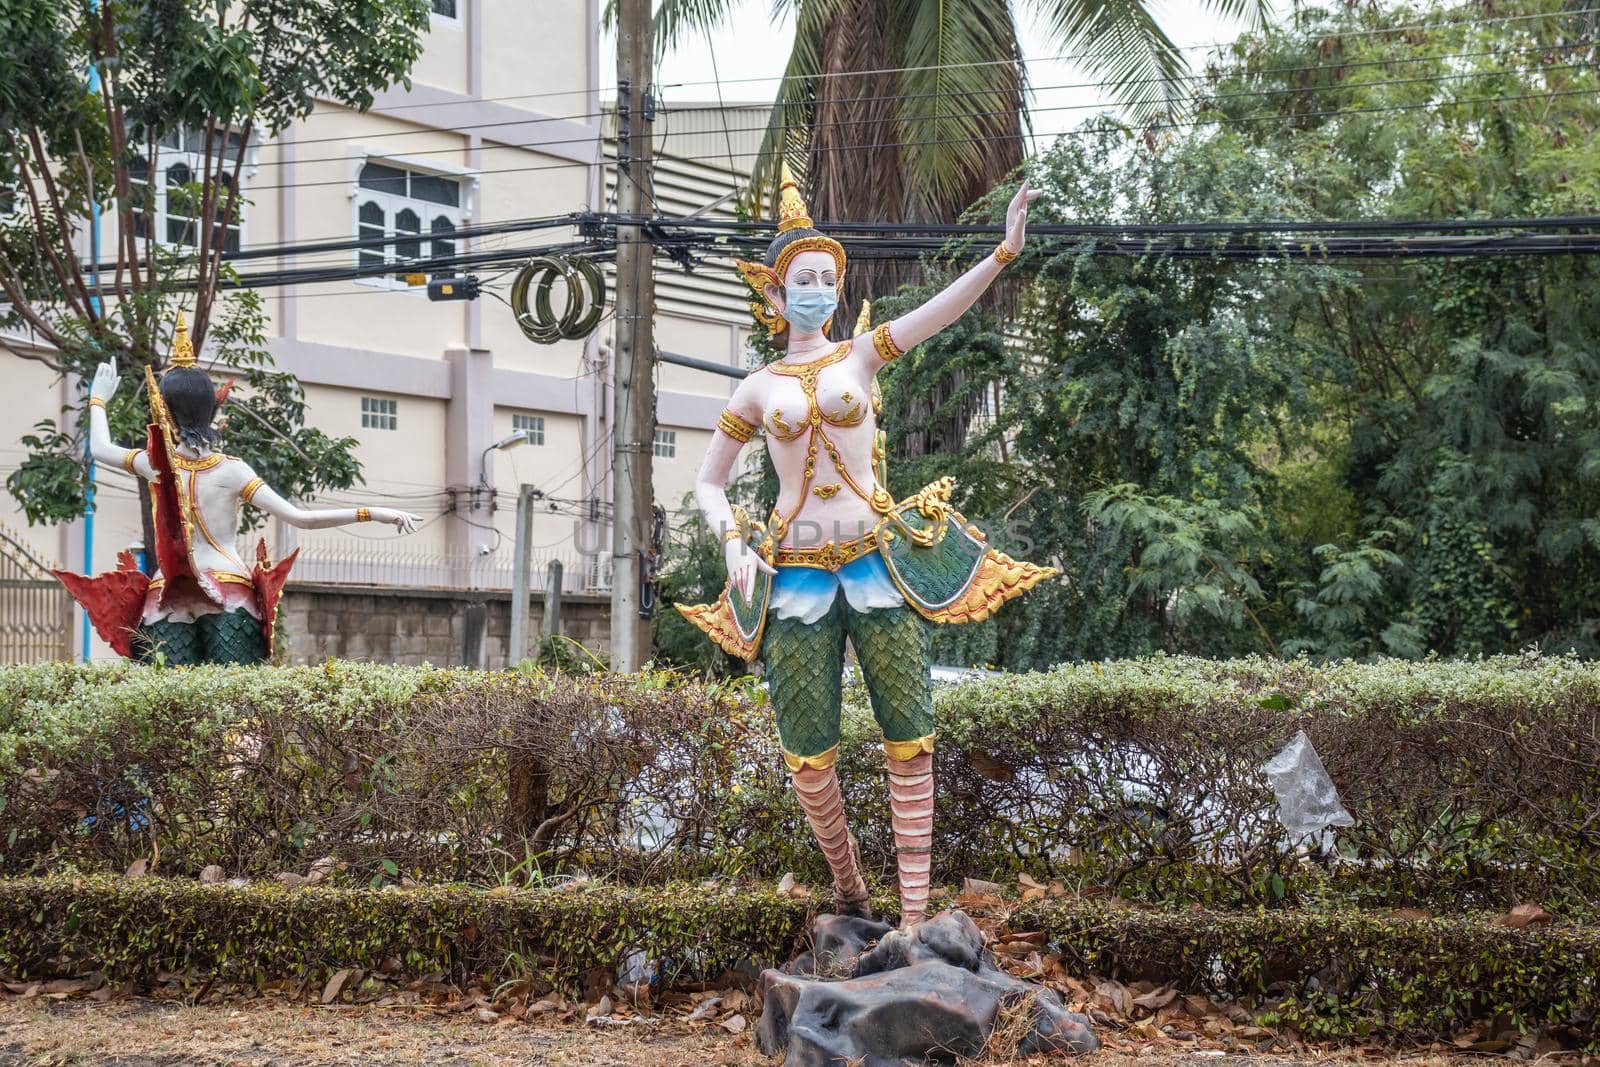 Kinnaree put a statue on the roadside to warn people to prevent the spread of COVID-19. With a protective mass